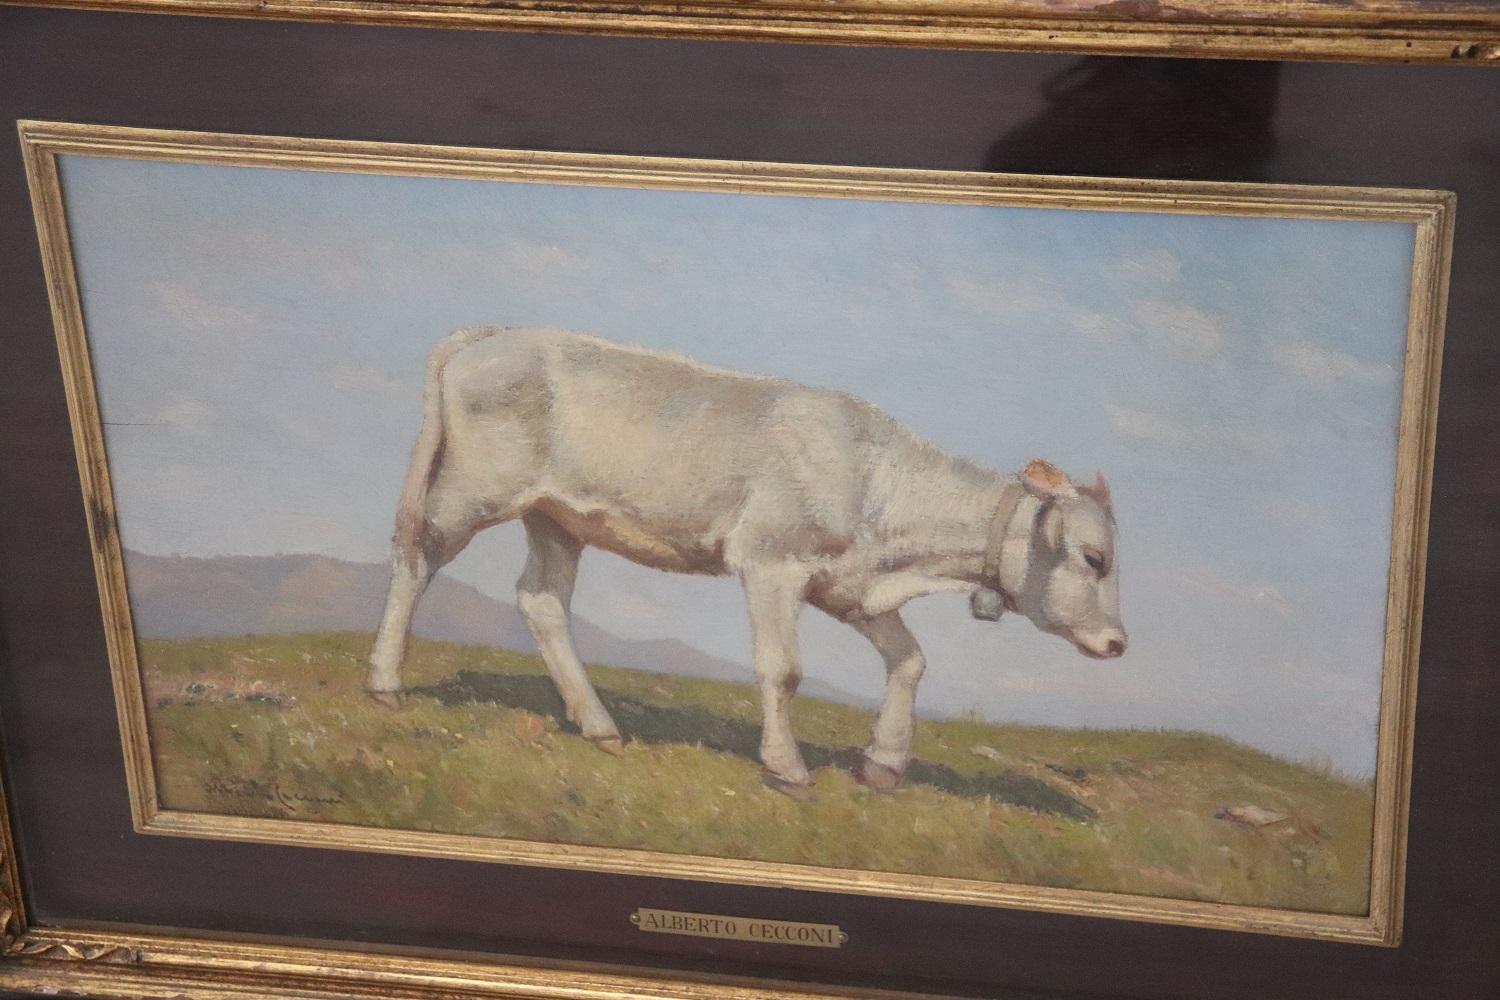 Beautiful oil painting on board. A splendid countryside with grazing calf in the foreground. Excellent pictorial quality.  Signed on the front lower right Alberto Cecconi. On the front in the frame is an engraved brass plaque ALBERTO CECCONI. No